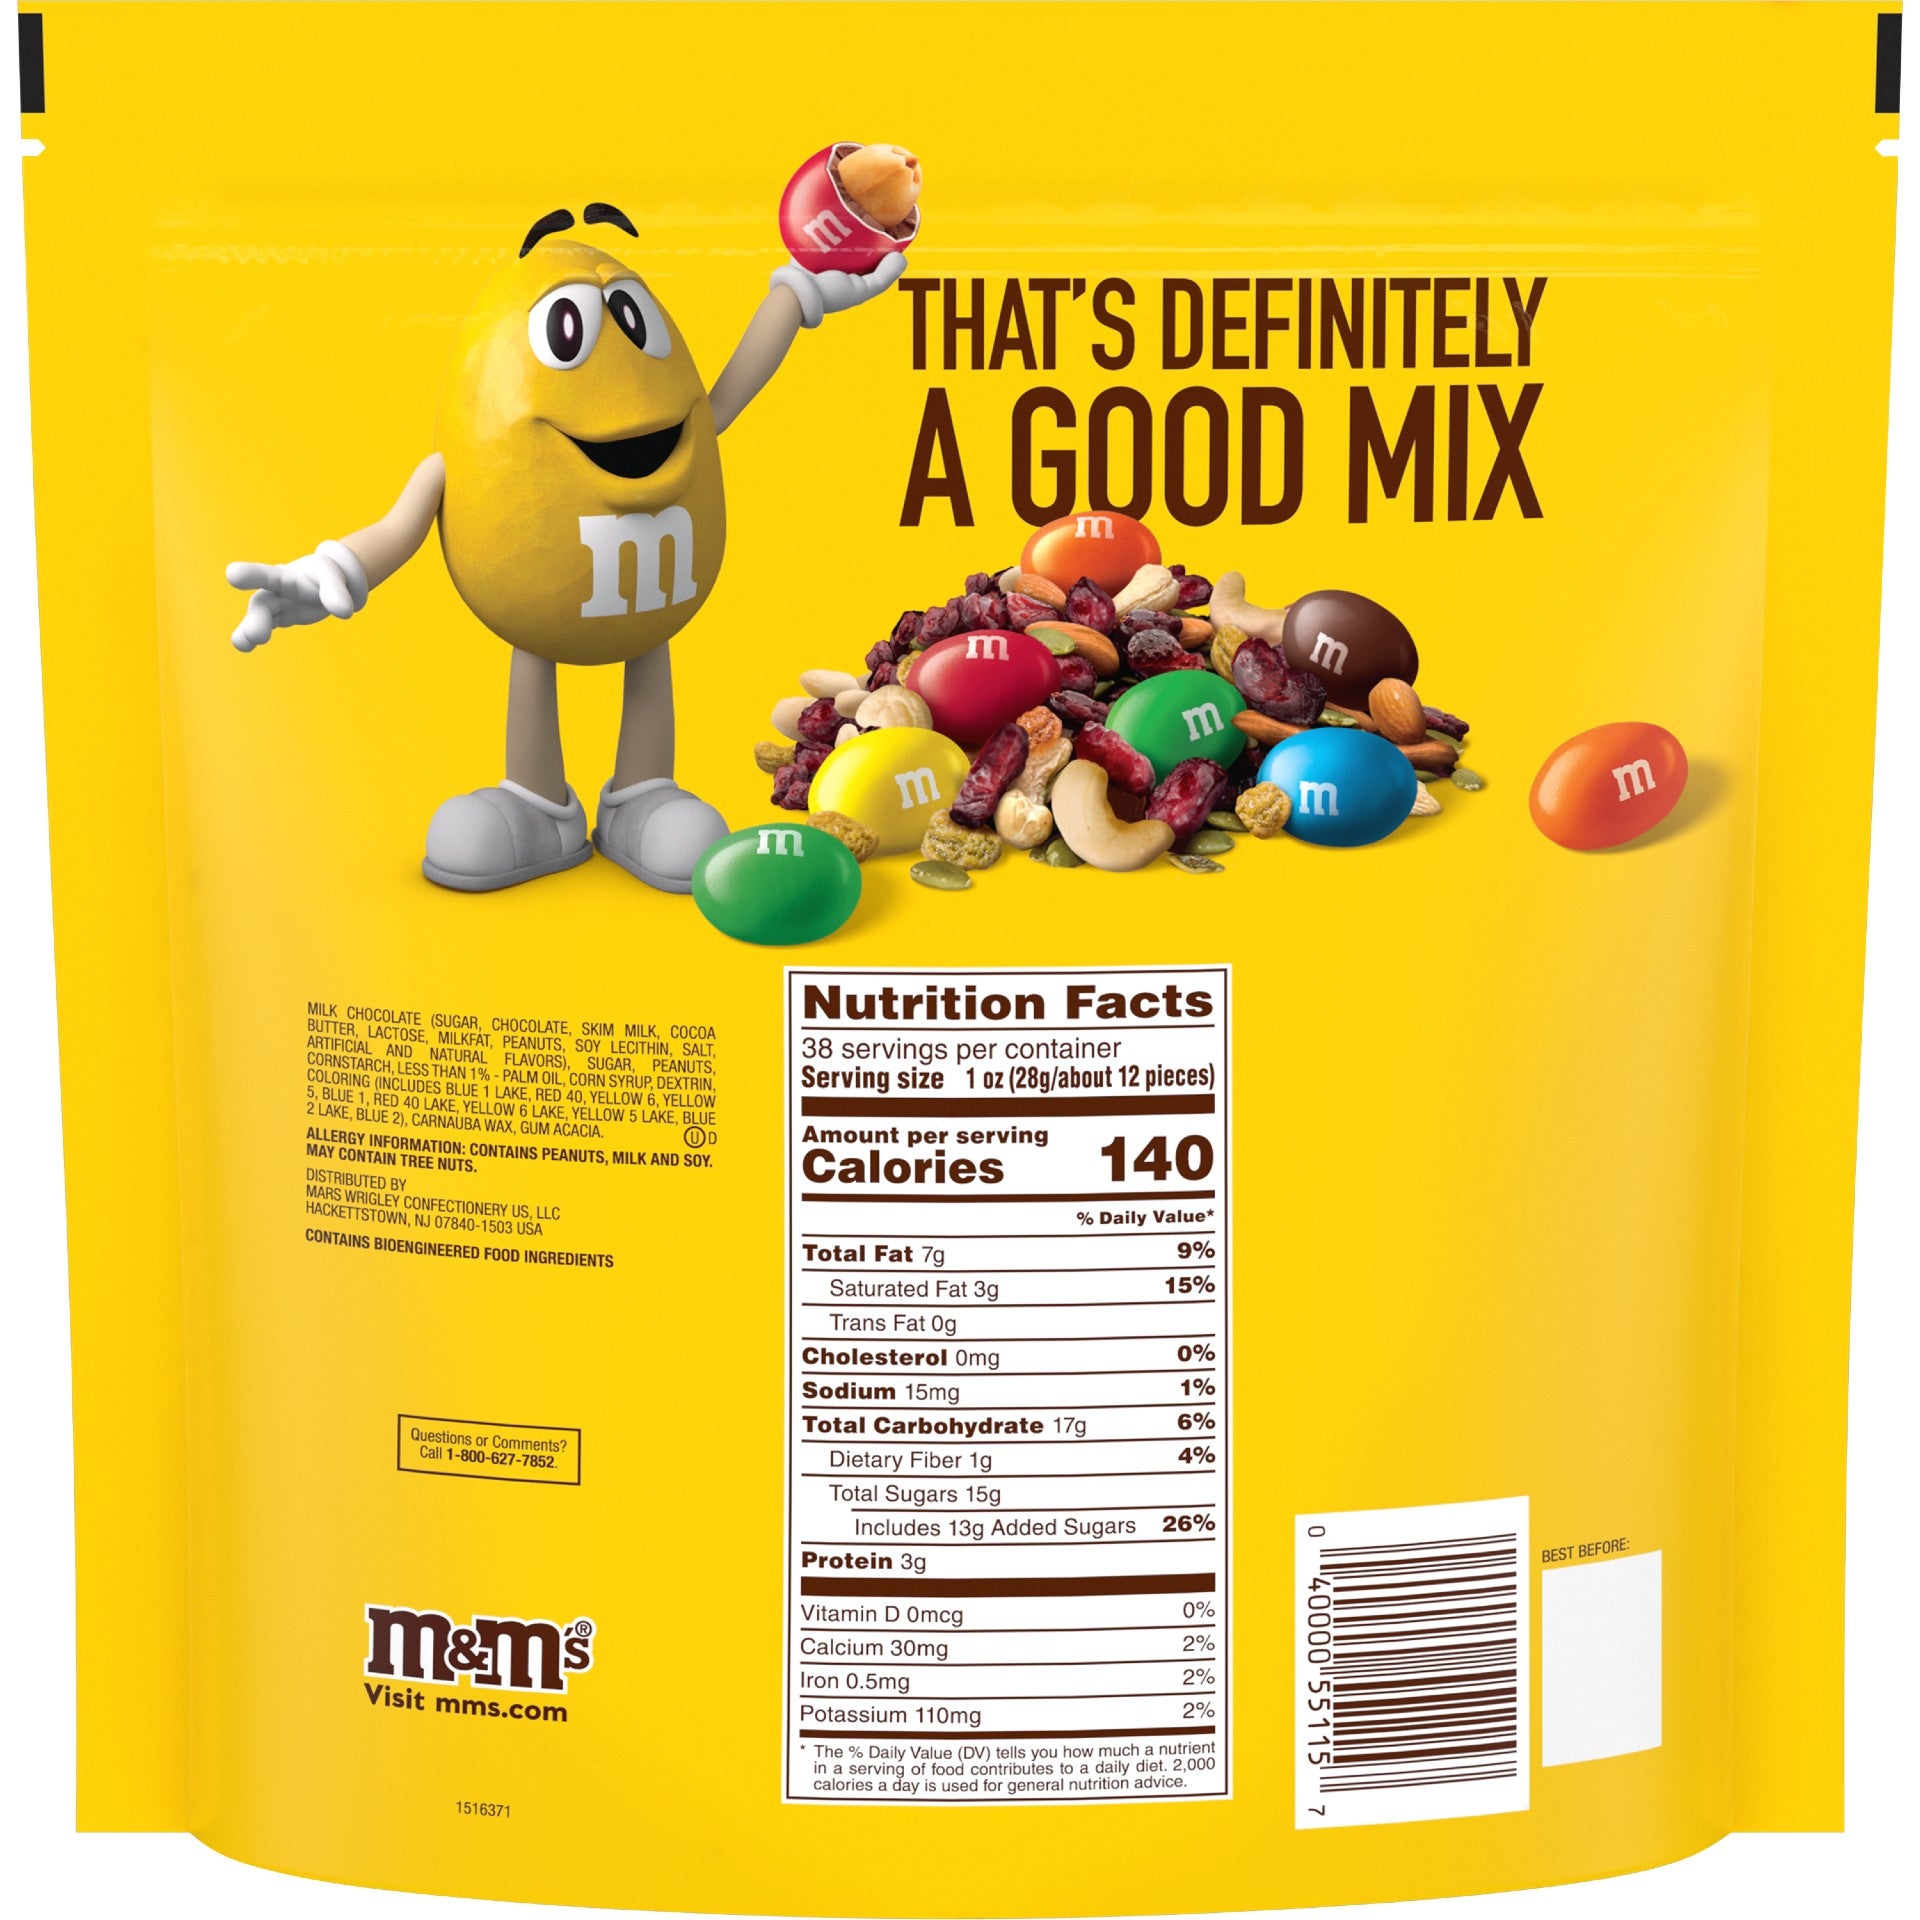  M&M'S Peanut Chocolate Candy Party Size Bag 42 Ounce (Pack of  2) : Grocery & Gourmet Food